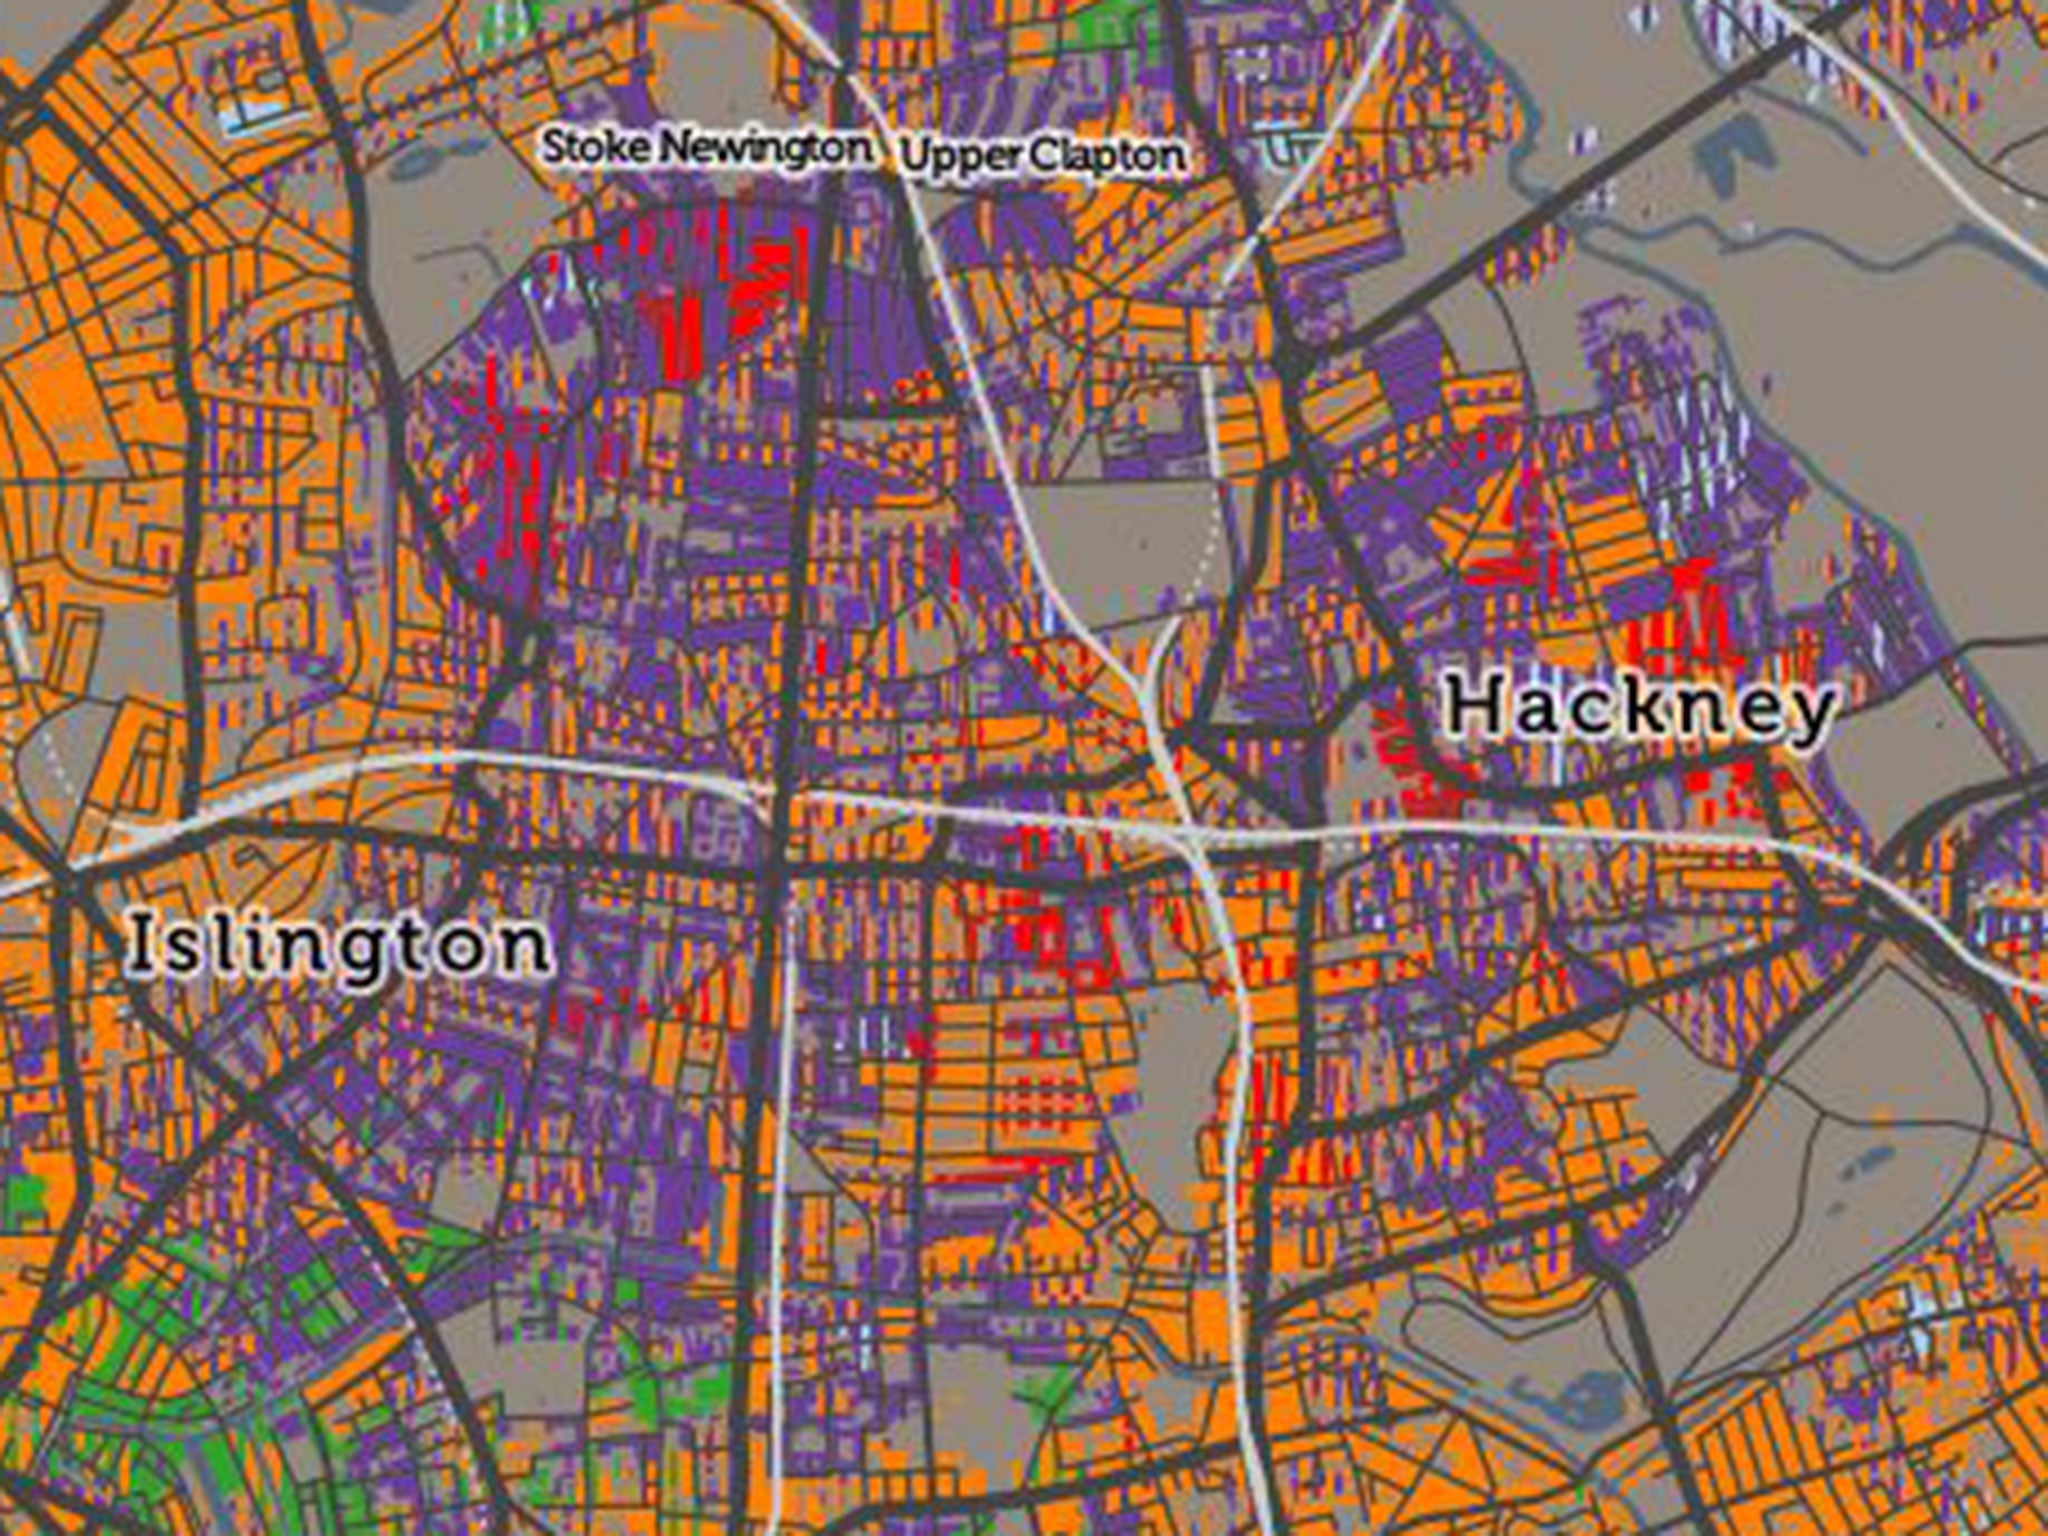 Islington and Hackney had a high proportion of people who travelled by bus, but also several areas where bicycle was the main method of travel